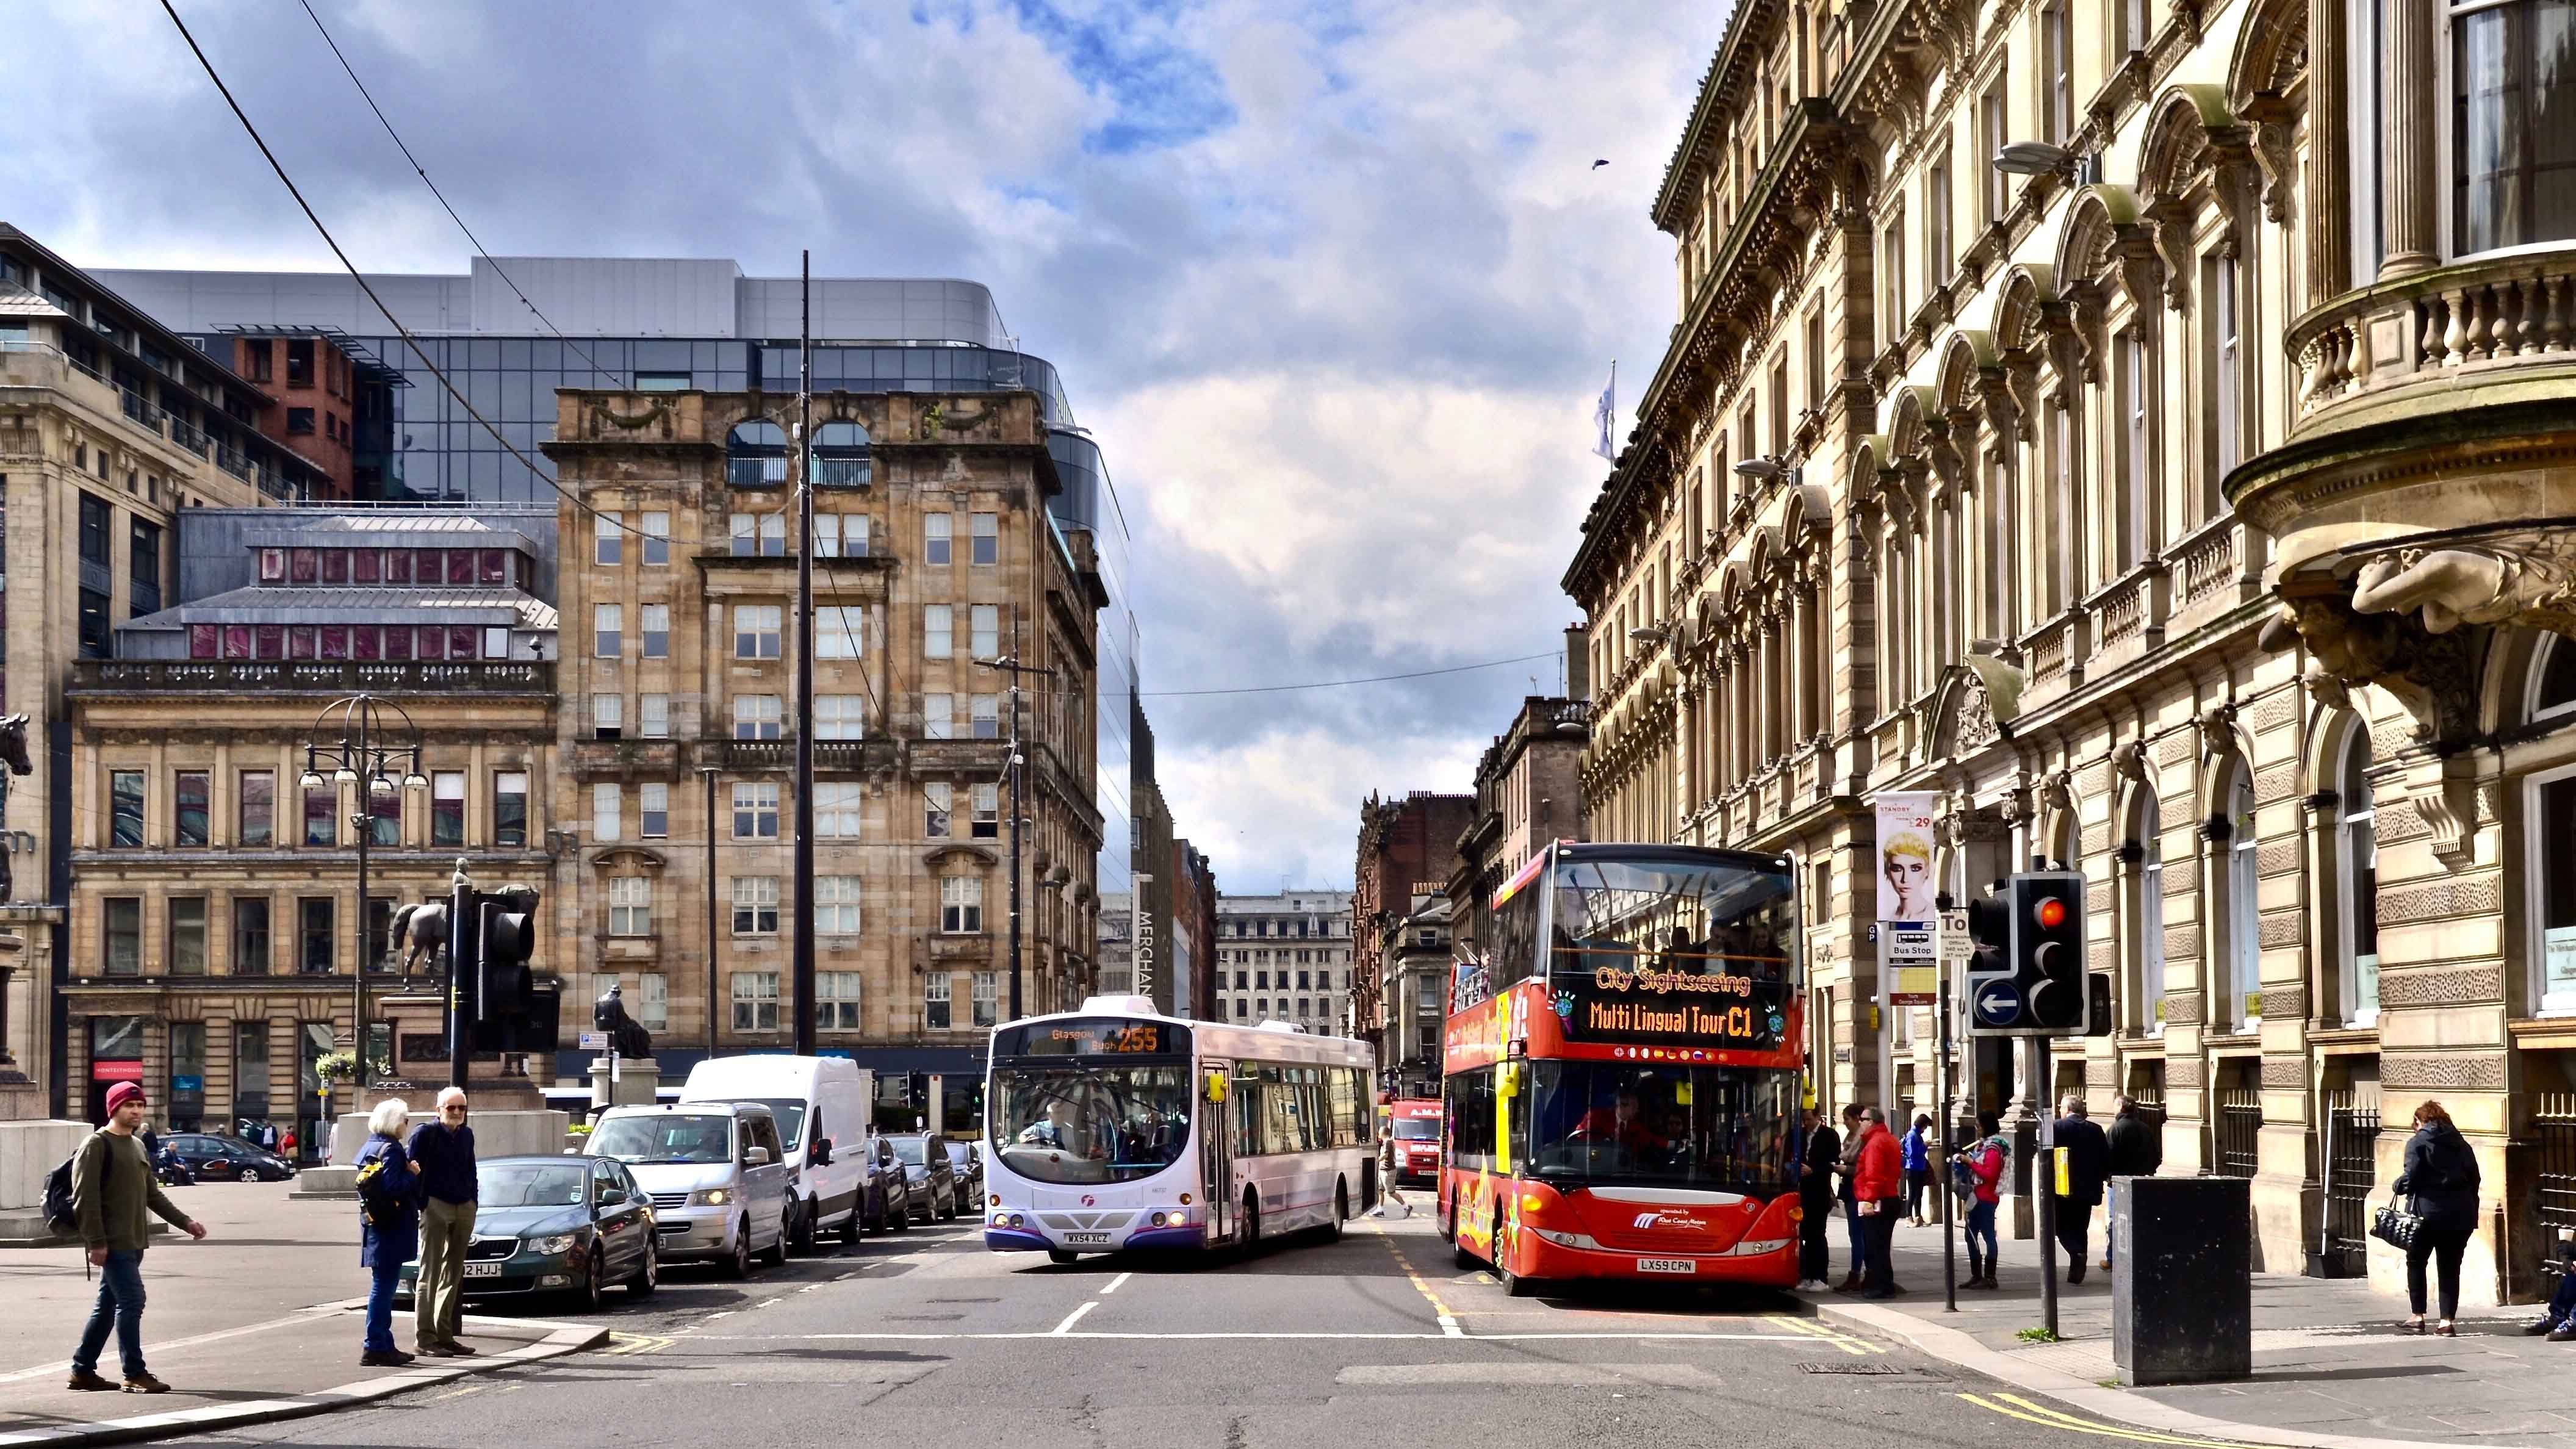 Busy city street with busses in Glasgow, Scotland.